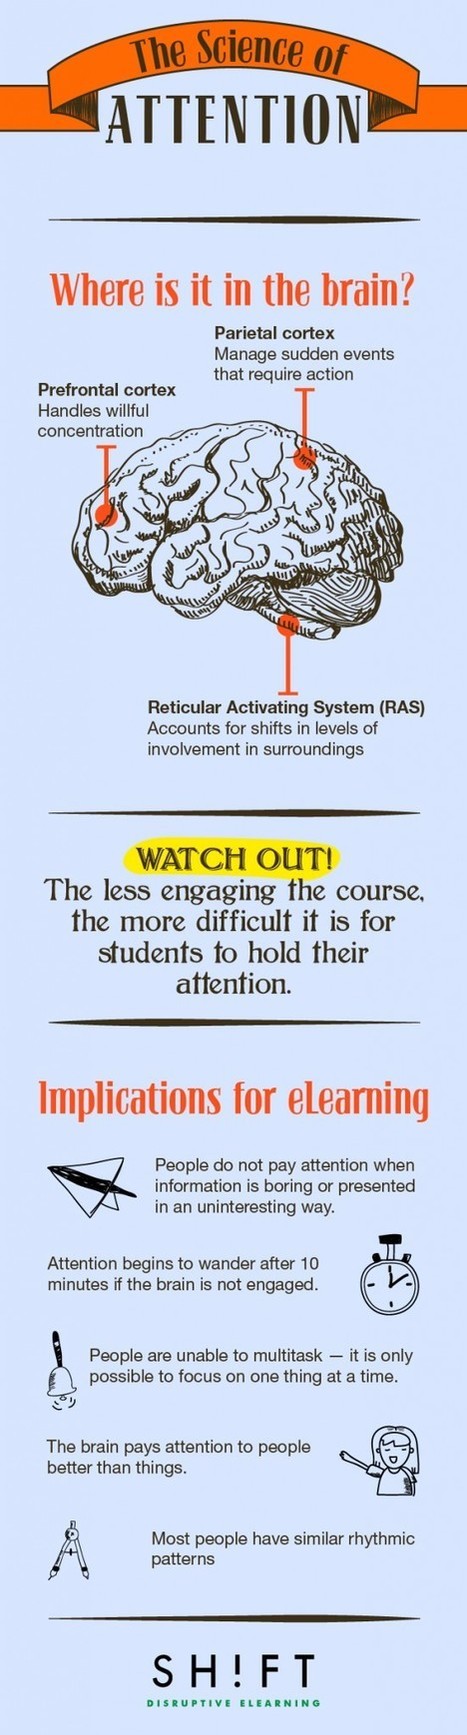 The Science of Attention in eLearning Infographic | E-Learning-Inclusivo (Mashup) | Scoop.it